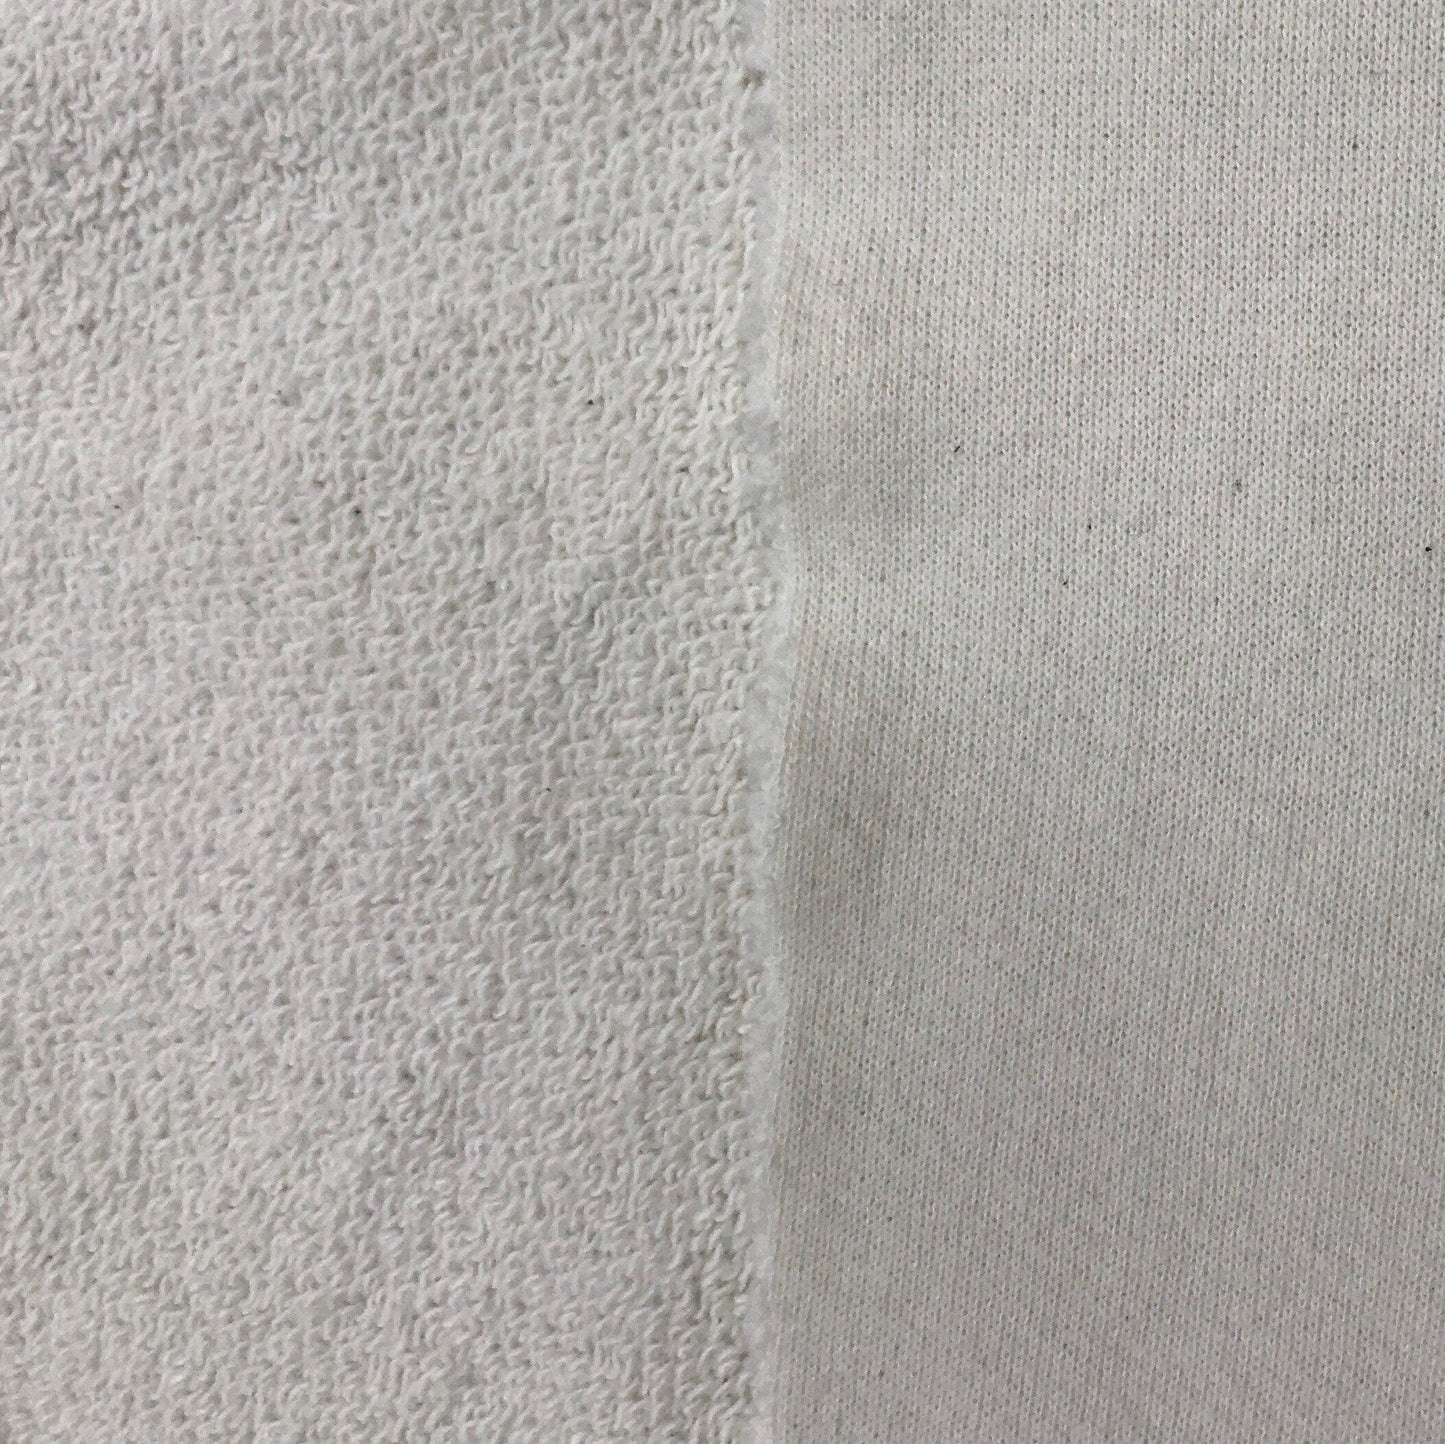 Natural Heavy Organic Cotton French Terry Fabric - Grown in the USA, $15.55/yd - Rolls - Nature's Fabrics